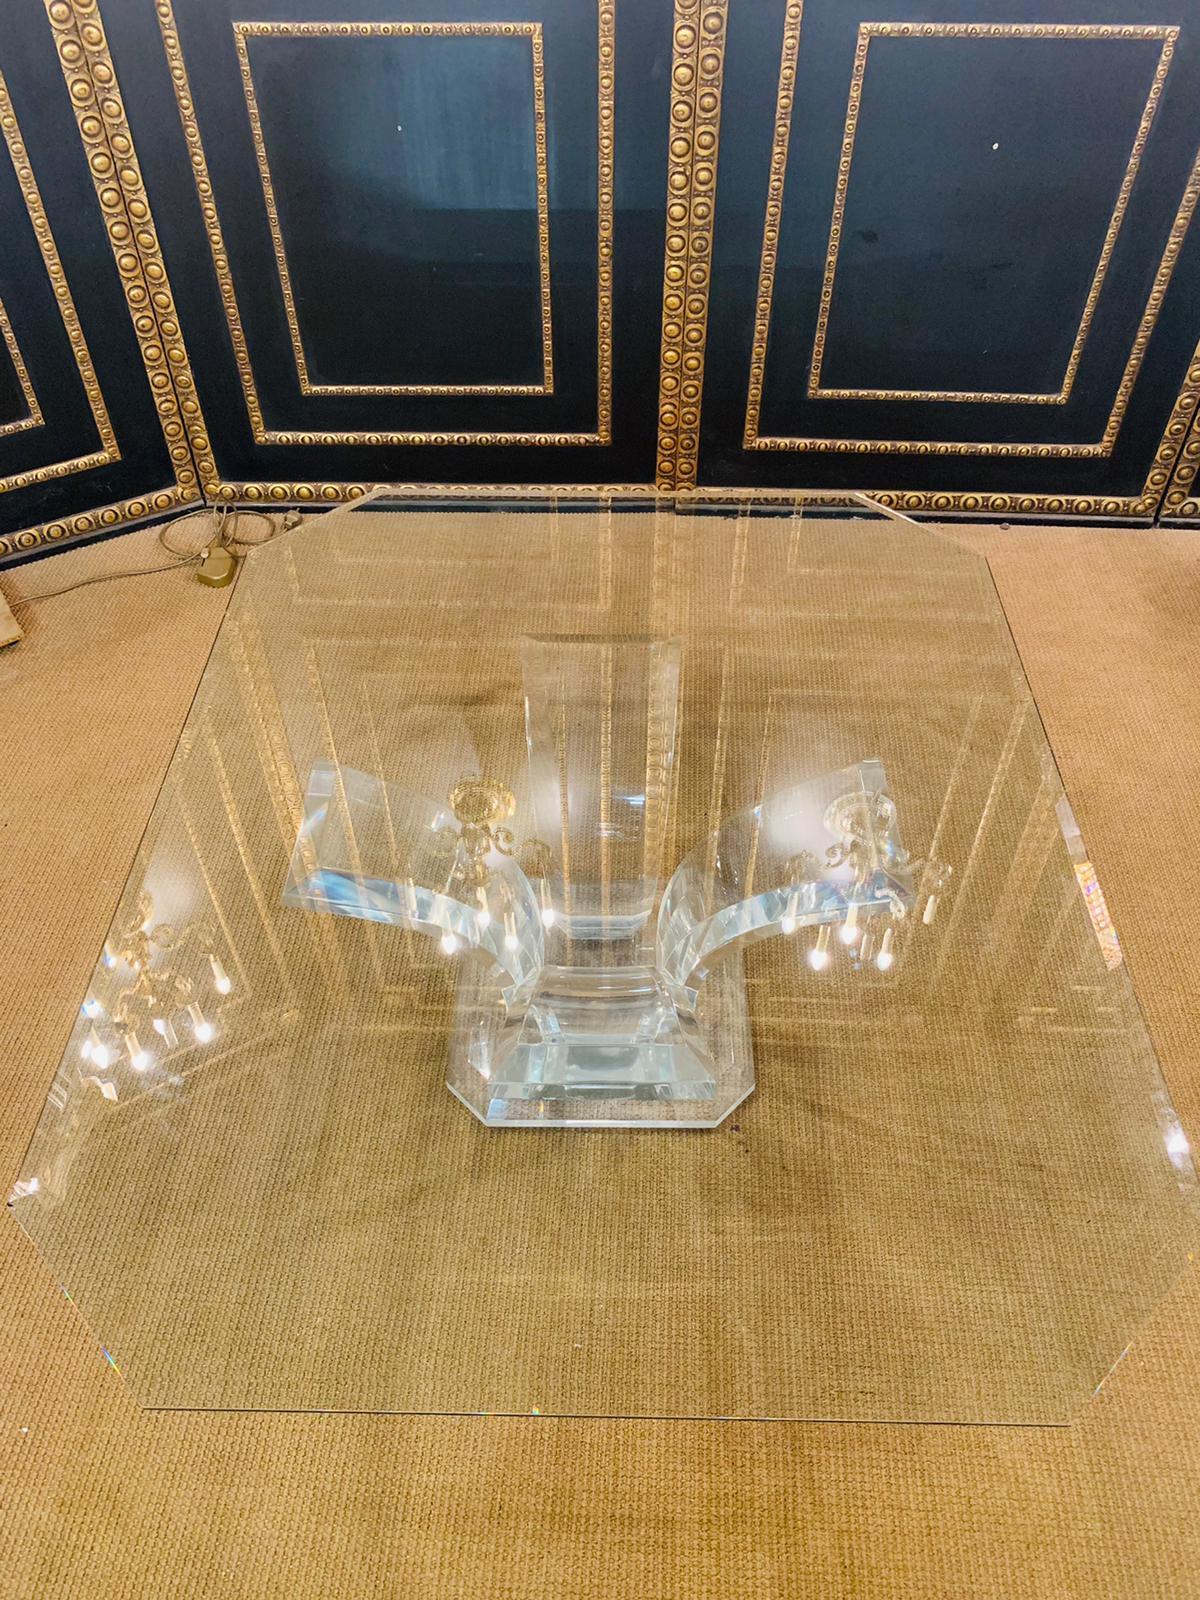 Glamorous sofa/coffee table, in the style of Jeffrey Bigelow for Spectrum LTD, circa 1976. Curved acrylic base inserted four gently curved, faceted acrylic cast plates that support a glass plate. Jeffrey Bigelow was one of the first to find cast